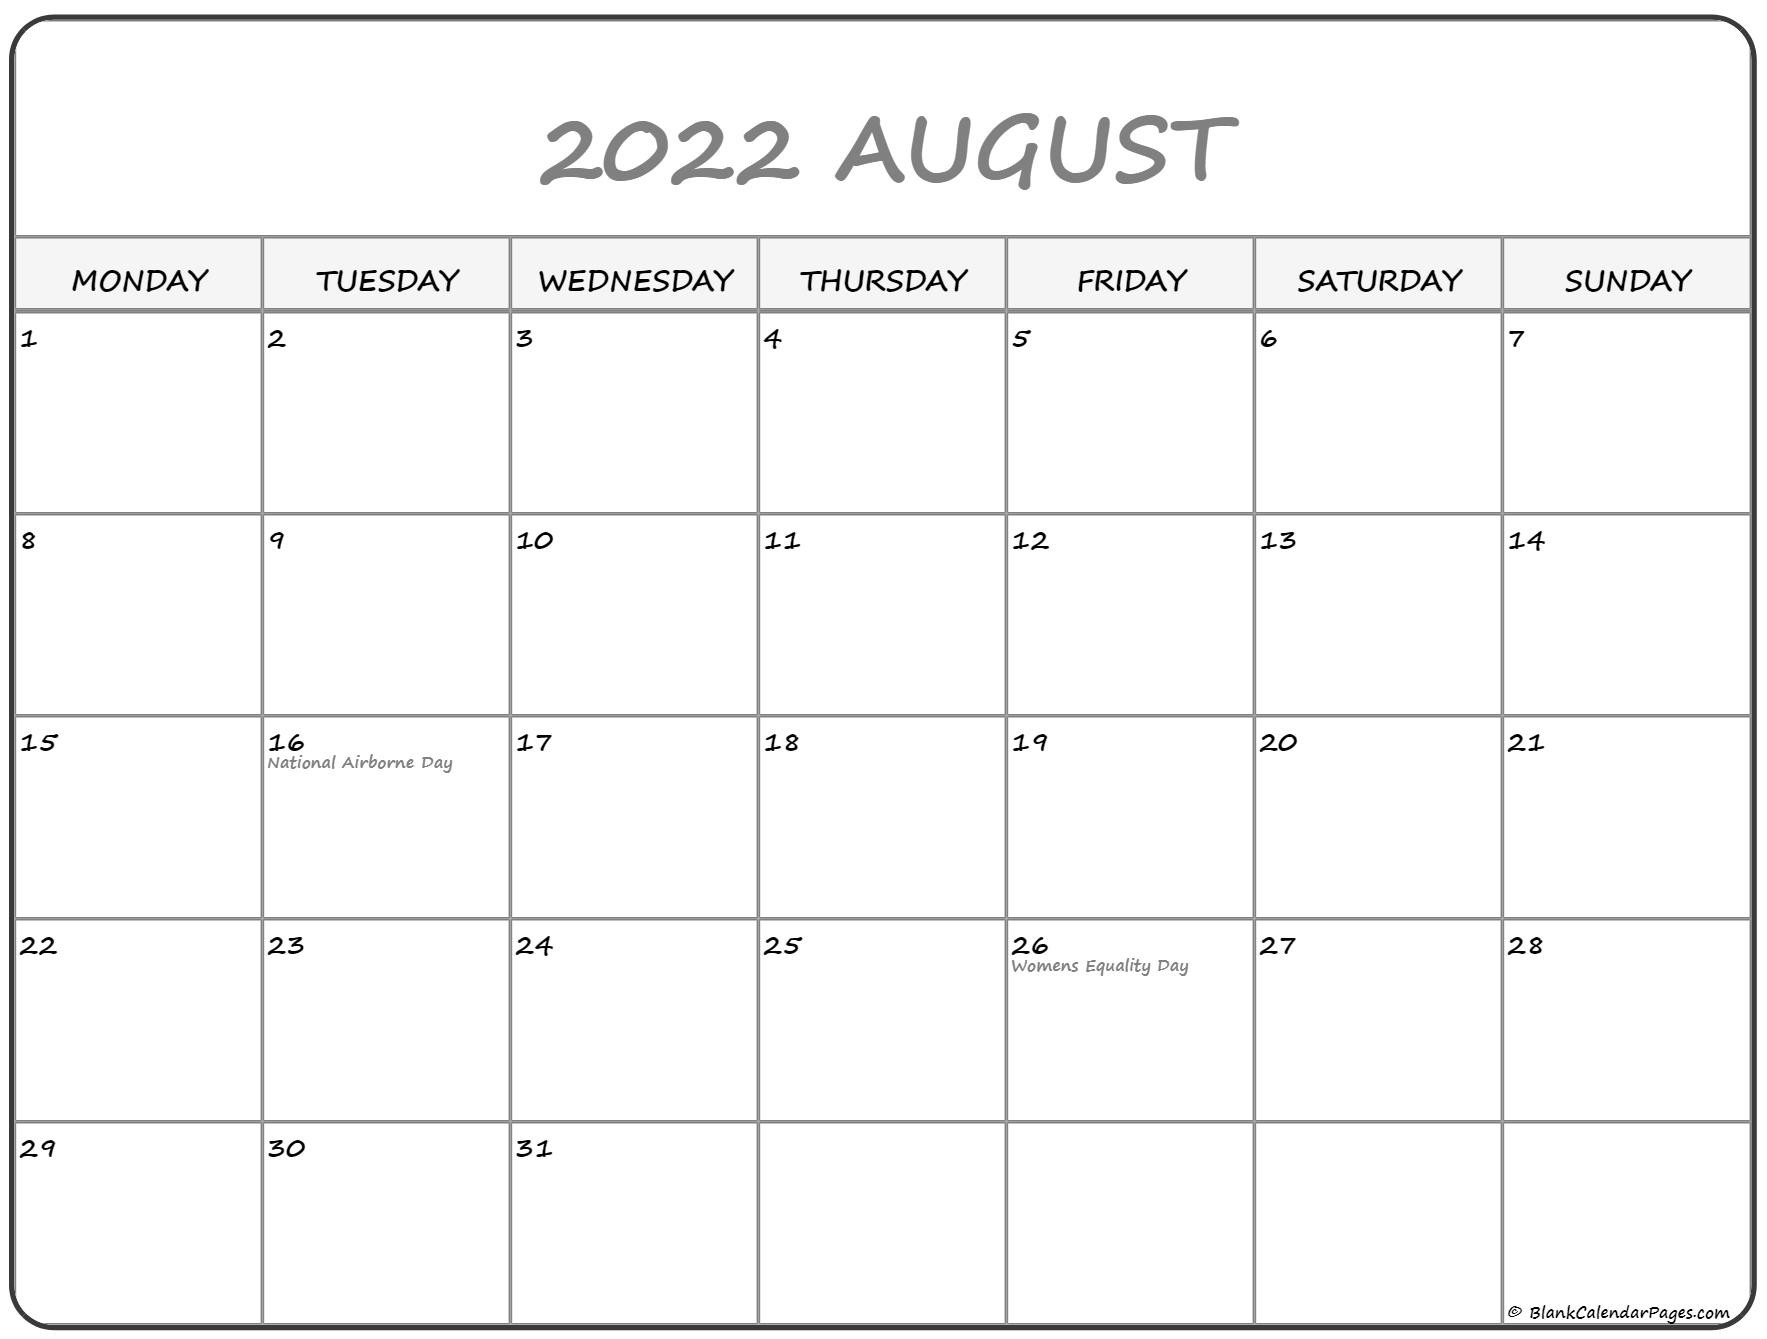 August 2022 Monday Calendar | Monday To Sunday  August 2022 To August 2022 Calendar Printable